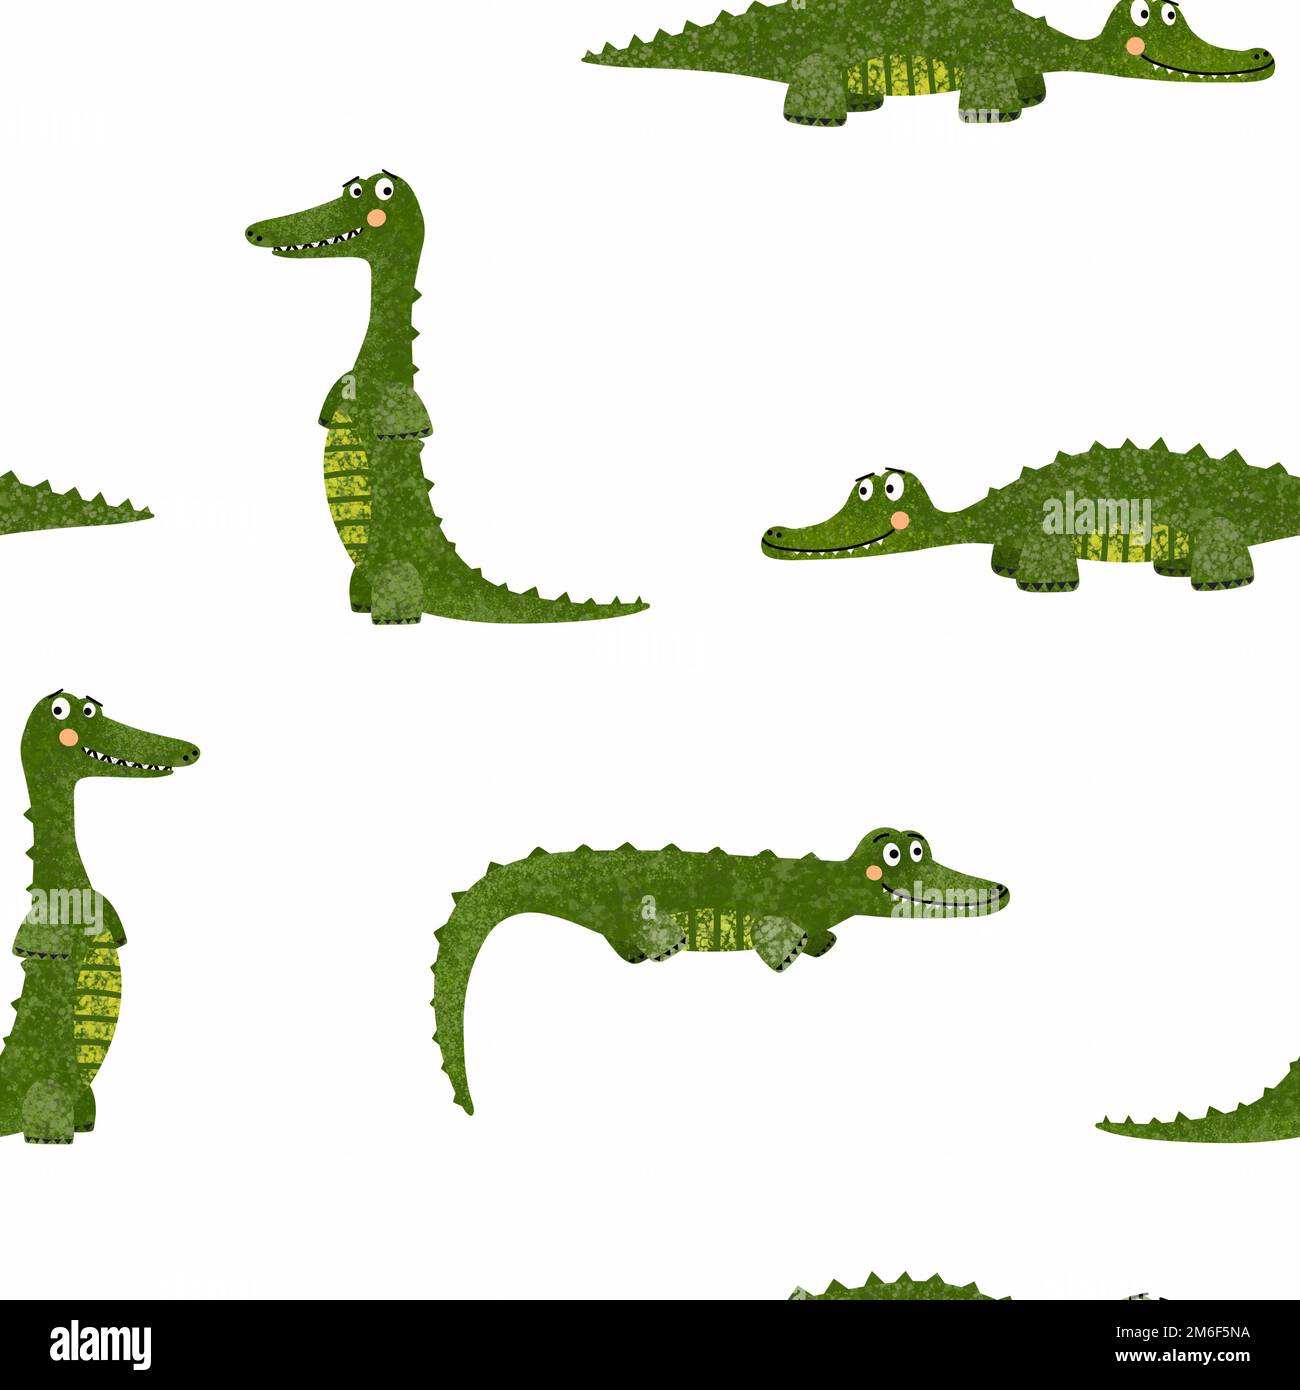 Crocodile seamless pattern with cute textured animals on white background. Raster illustration for fabric, packaging, textile, apparel, wallpaper. Stock Photo